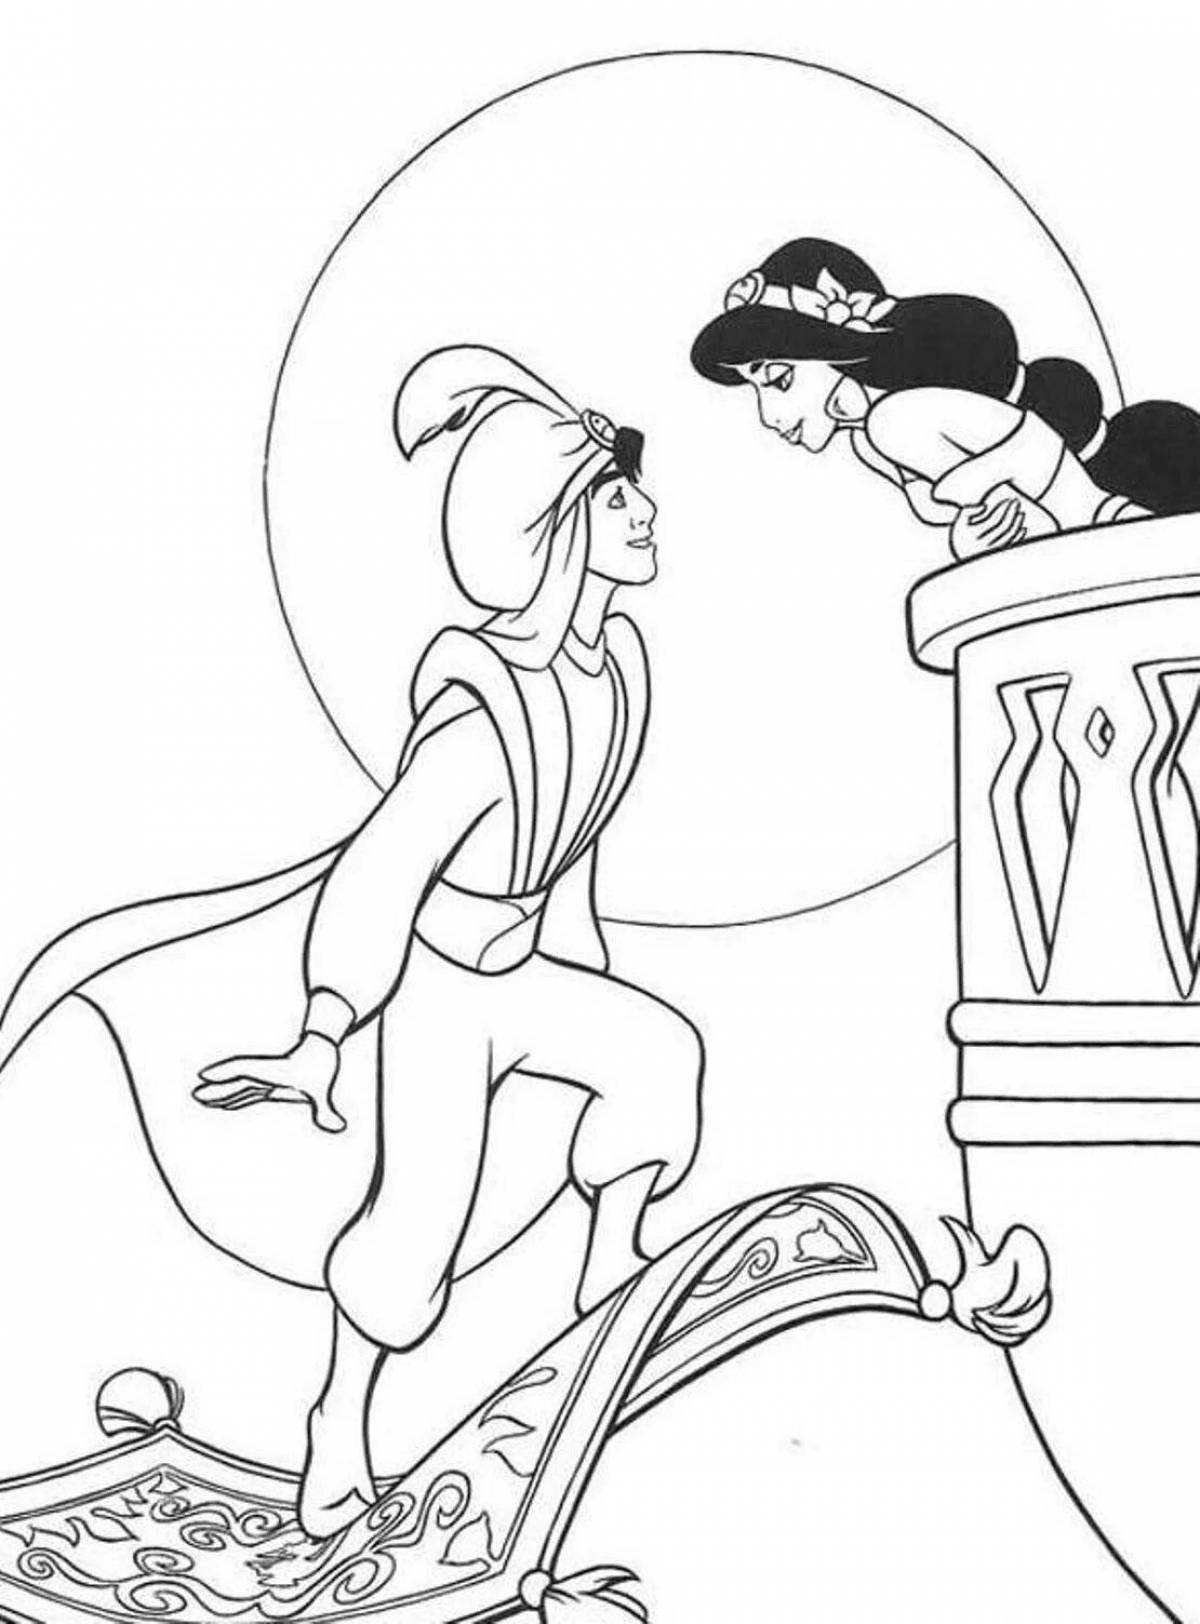 Awesome coloring book aladdin and jasmine